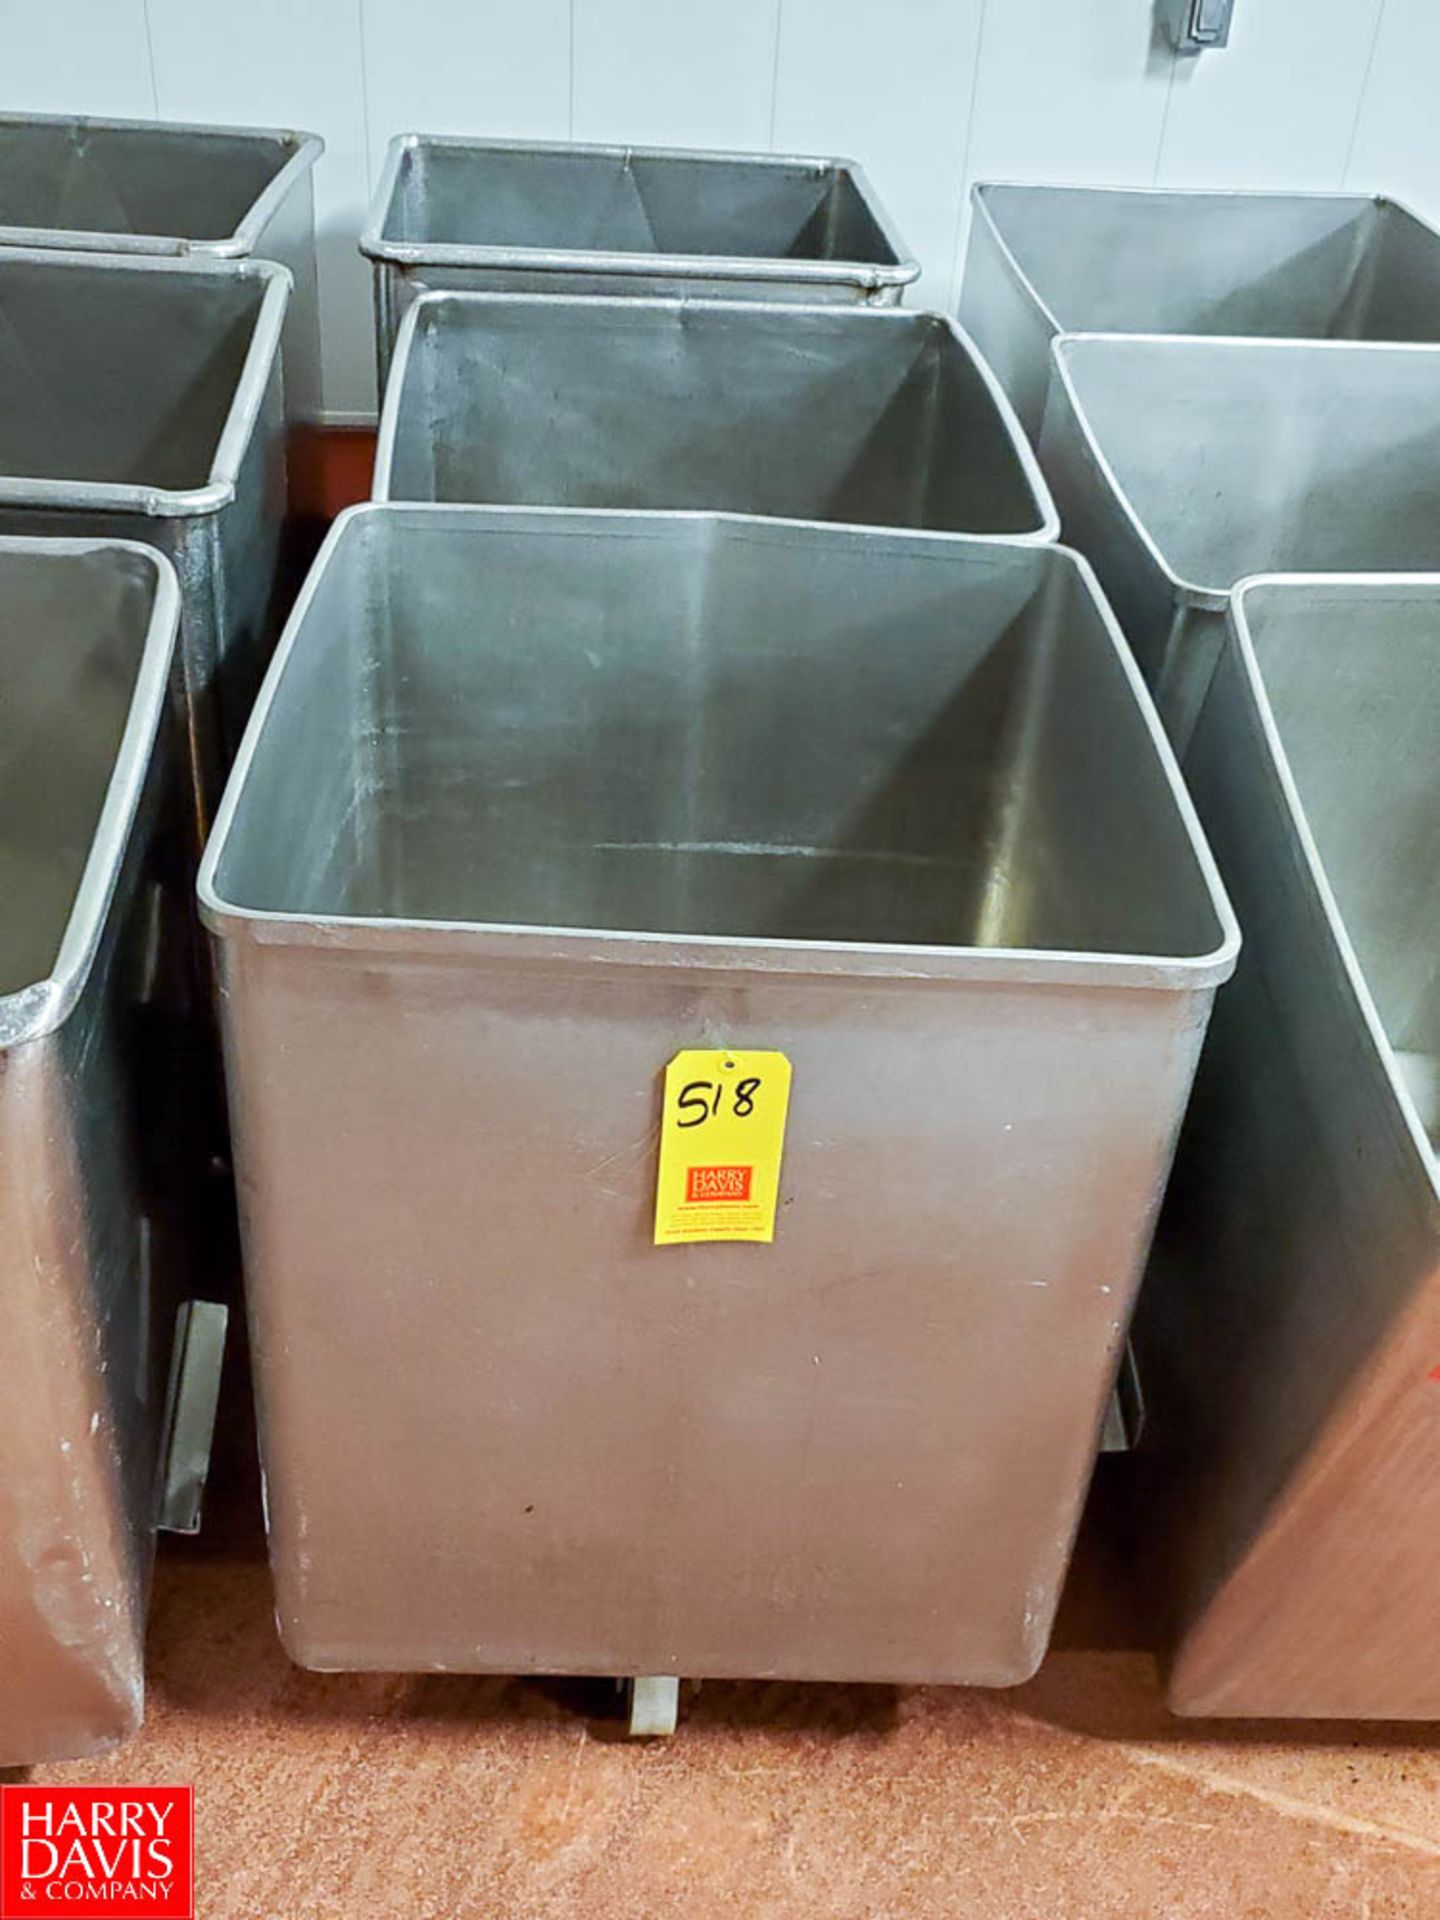 S/S Dump Tubs, 26" x 26" X 30", on Casters Rigging Fee: $ 60